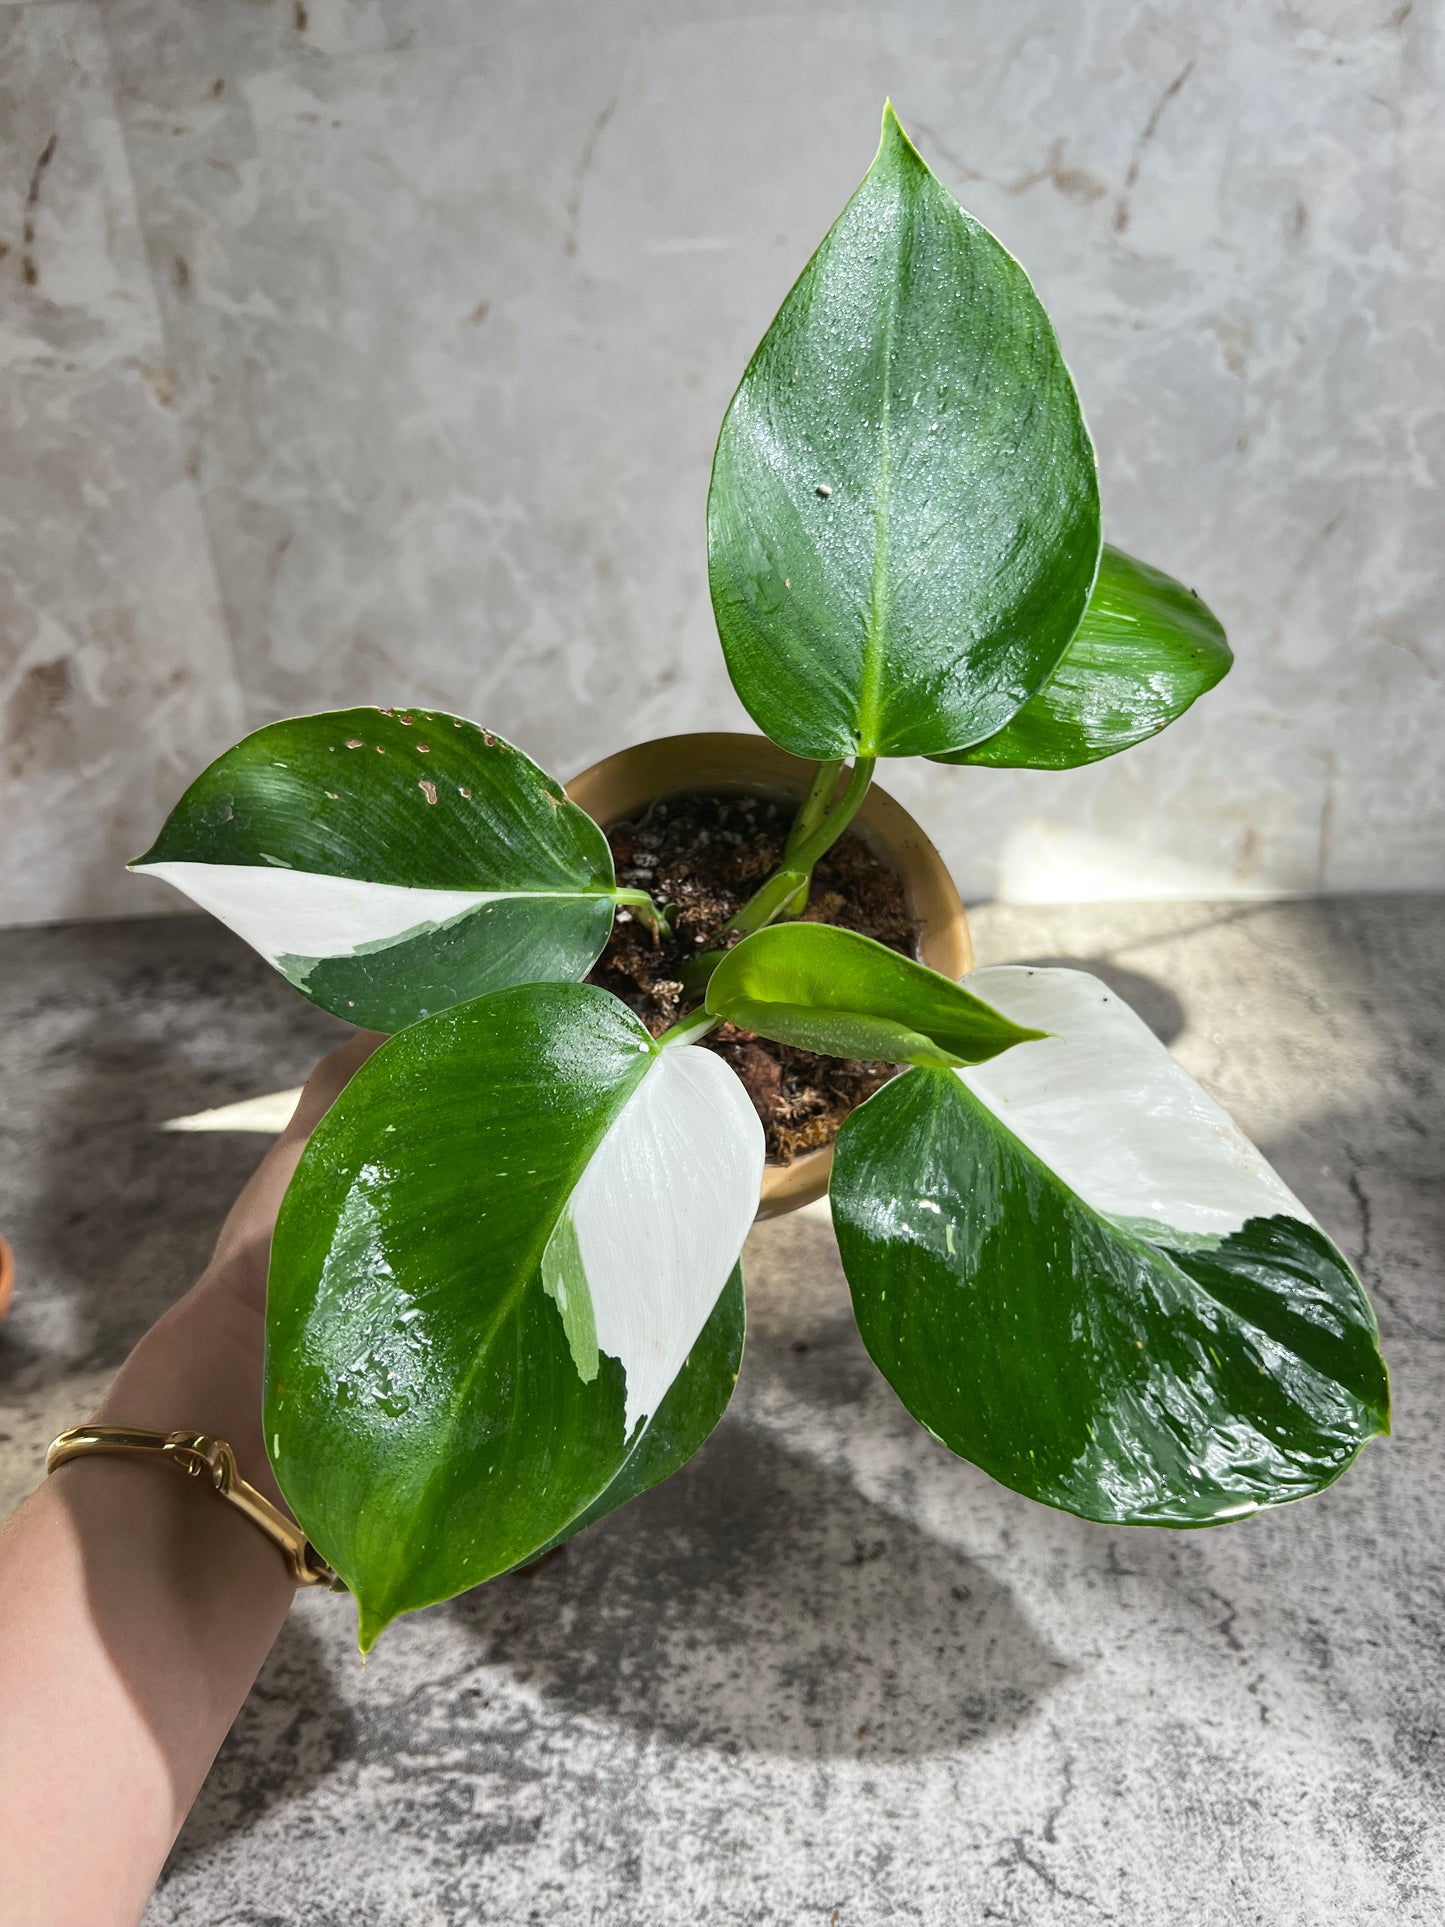 Philodendron white wizard rooting 1 leaf highly Variegated